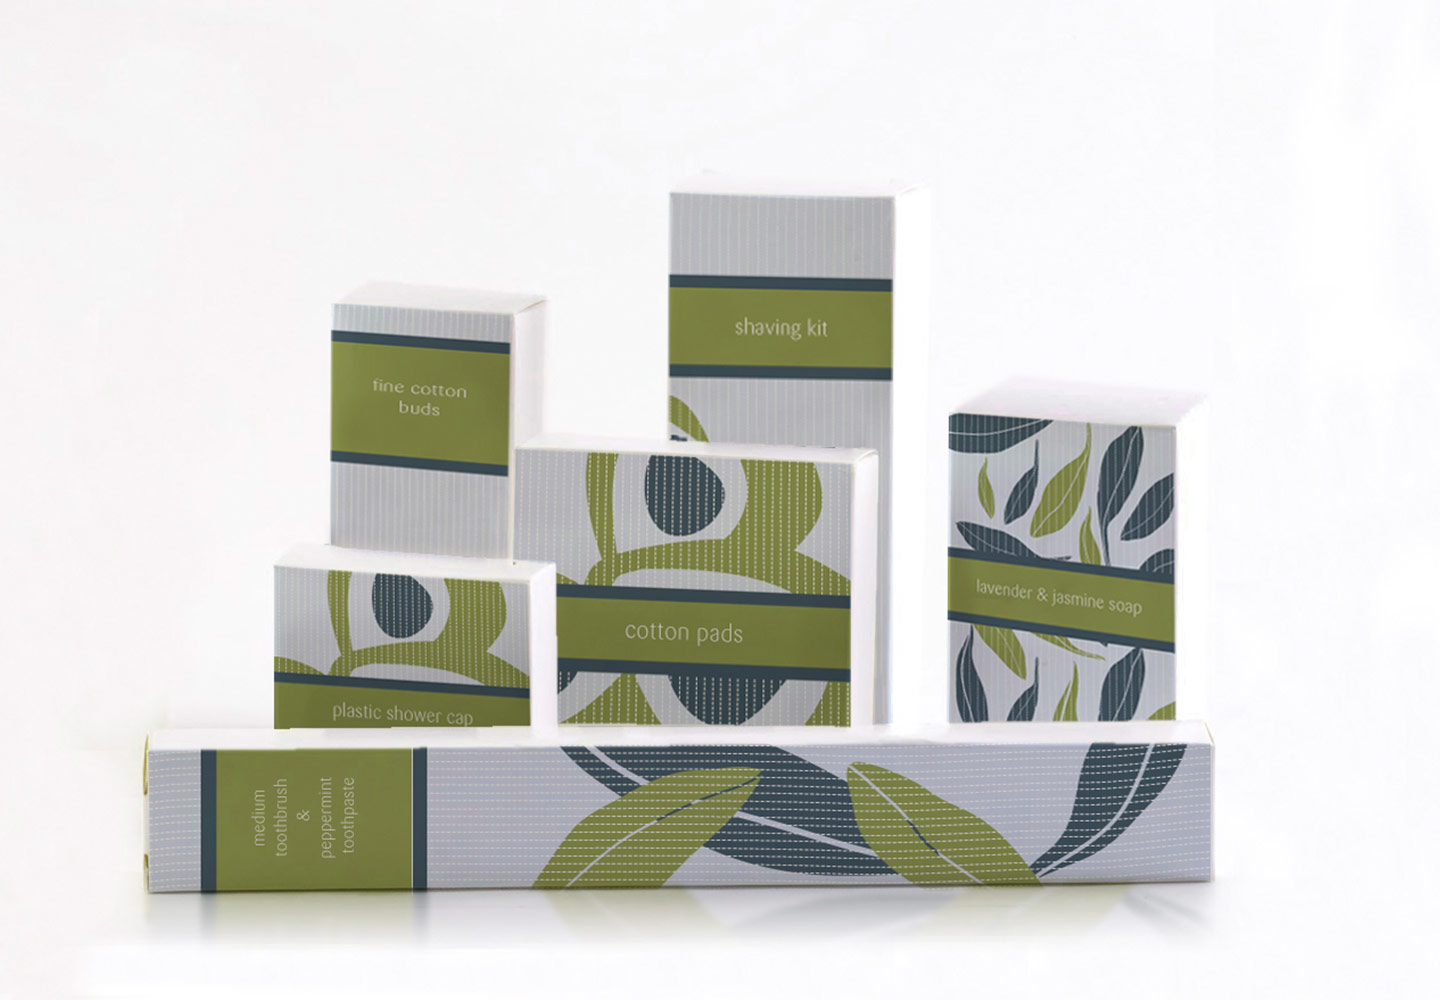 Brand Consultancy in Hospitality Industry. Packaging design for Rendezvous Hotel.